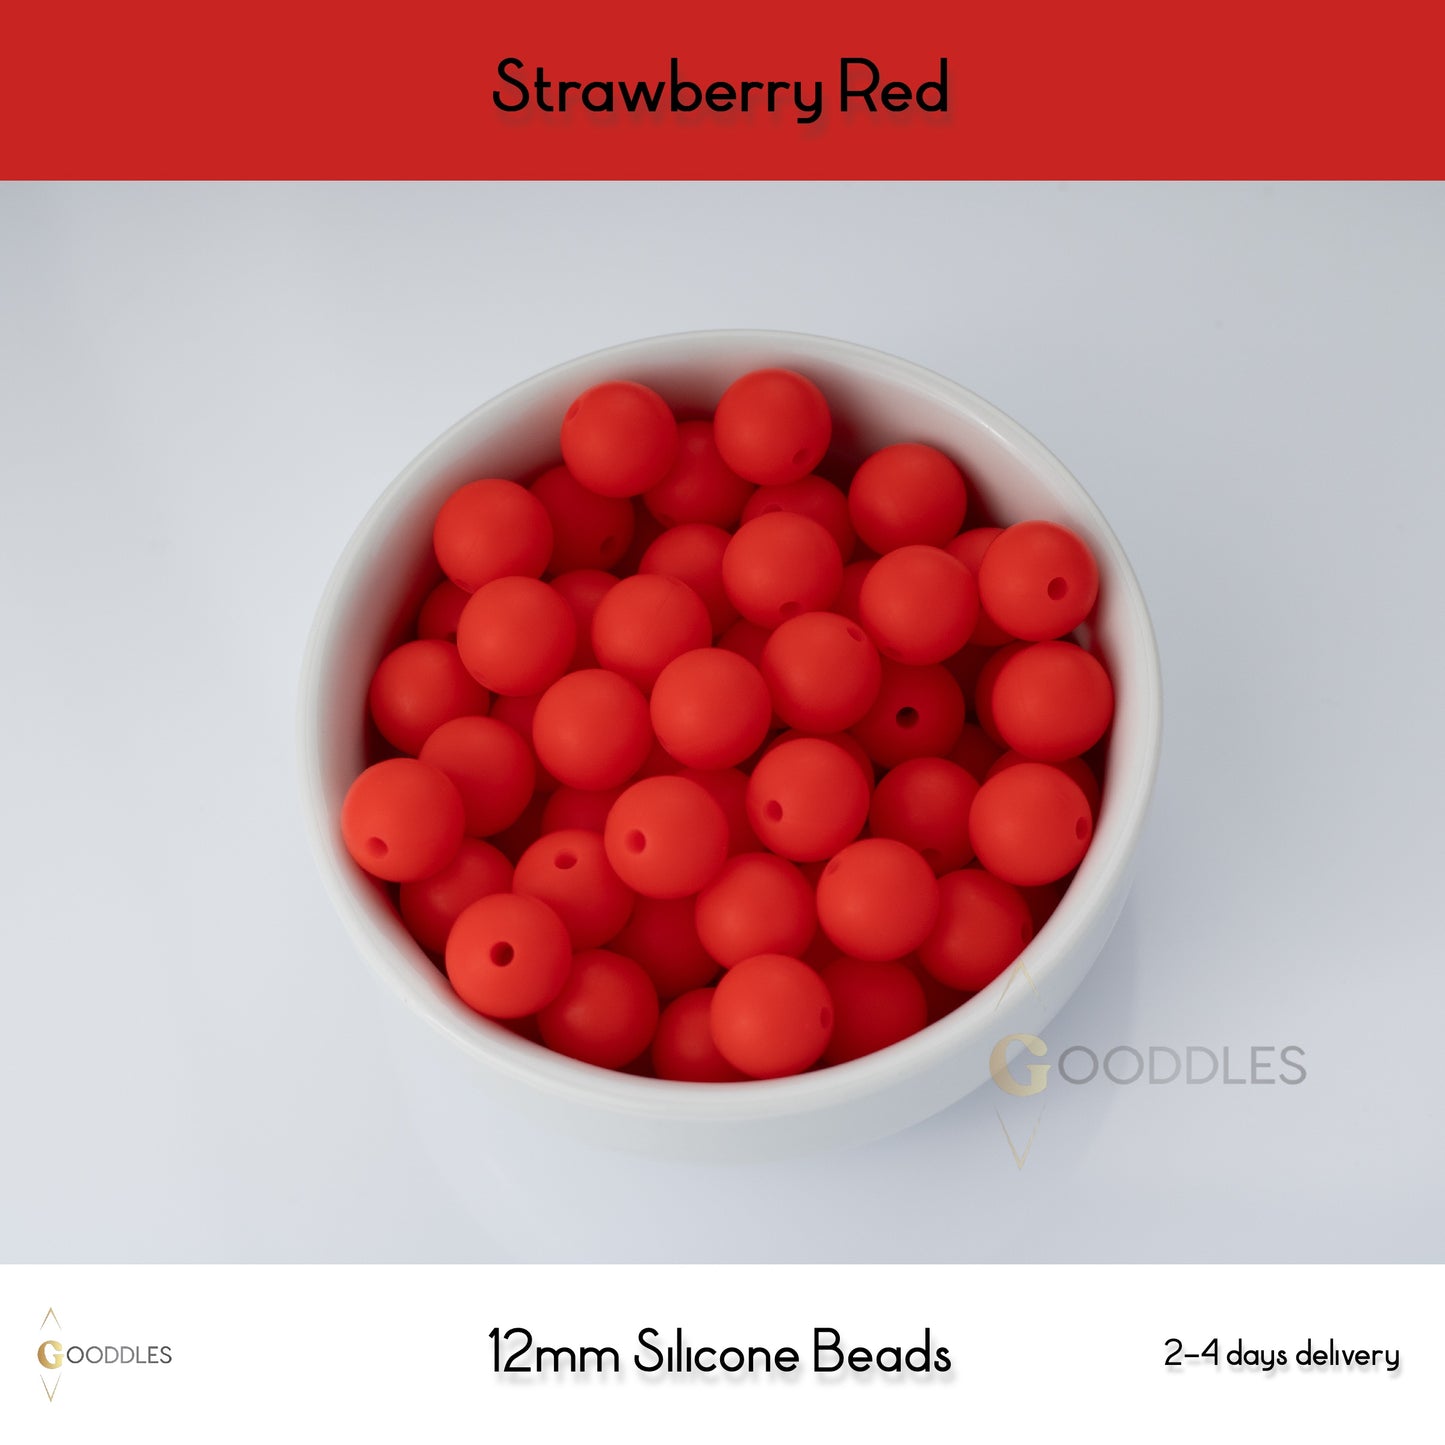 5pcs, Strawberry Red Silicone Beads Round Silicone Beads